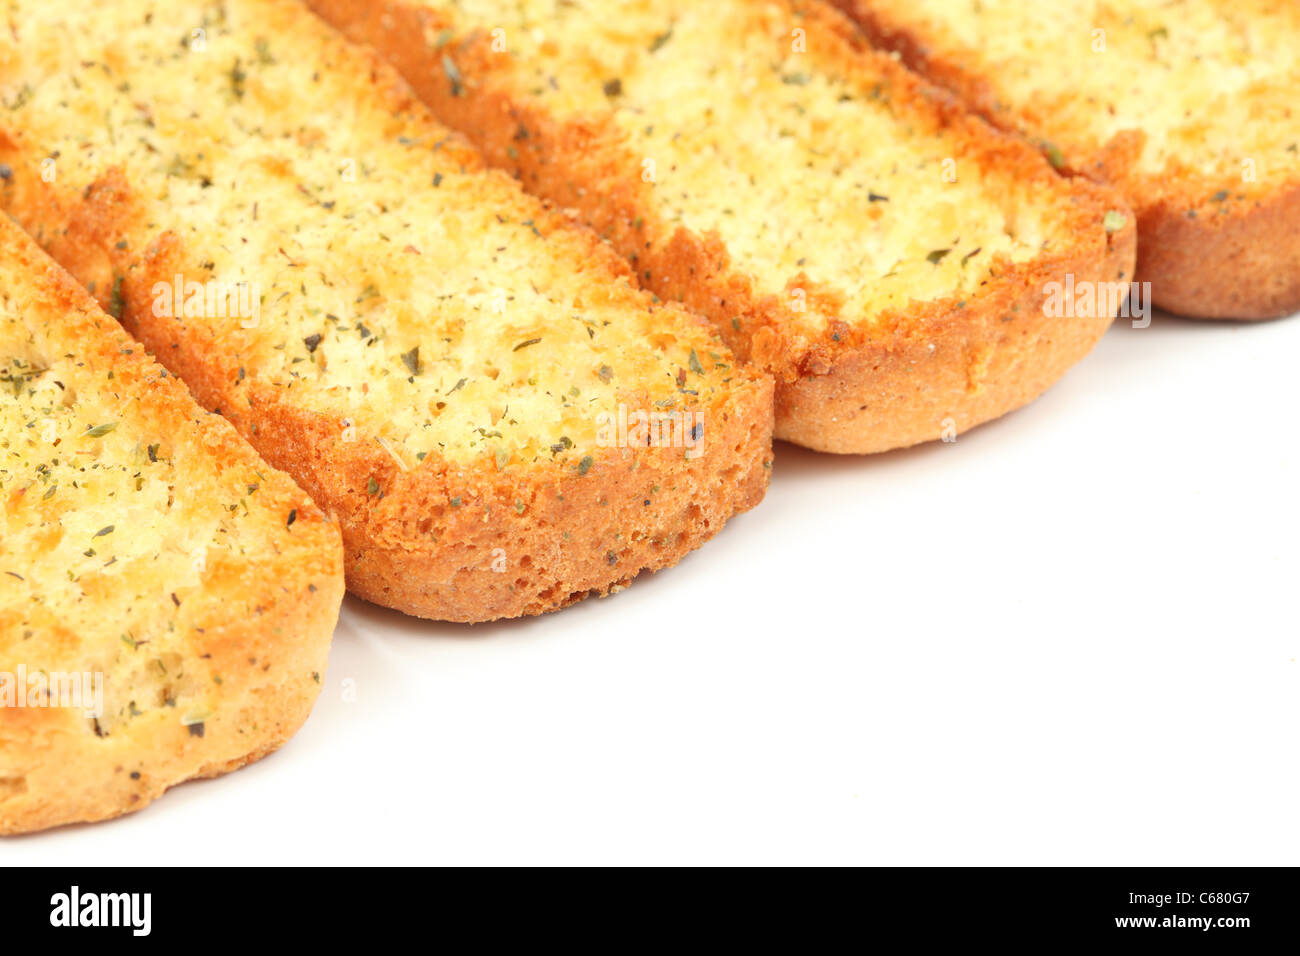 Pain bruschetta italienne isolated over white background Banque D'Images